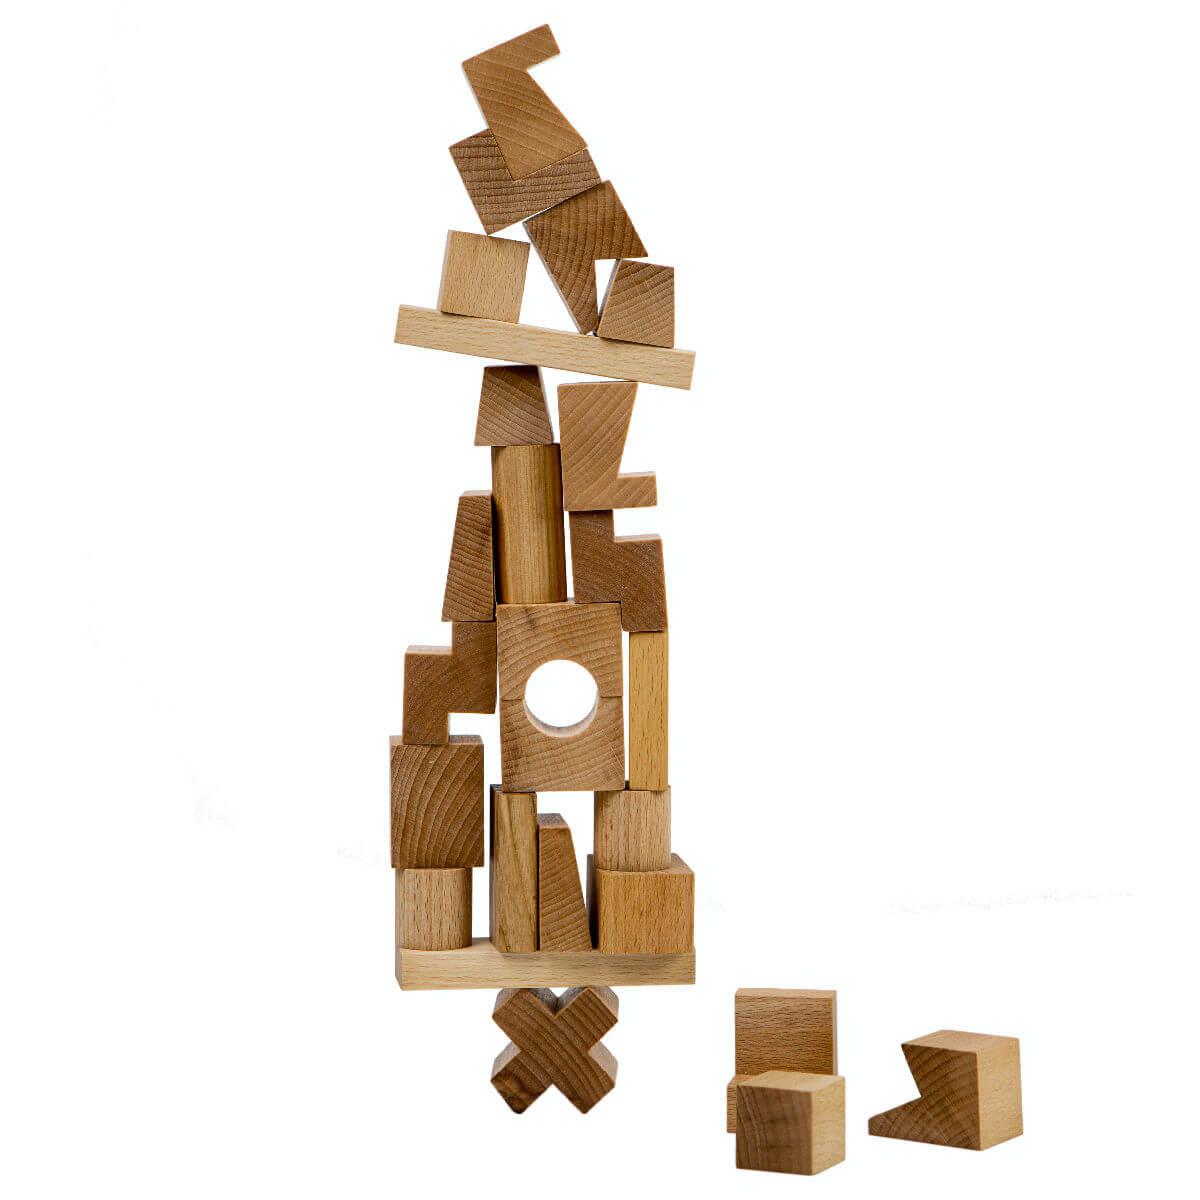 Wooden Stacking Tower Buidling Blocks